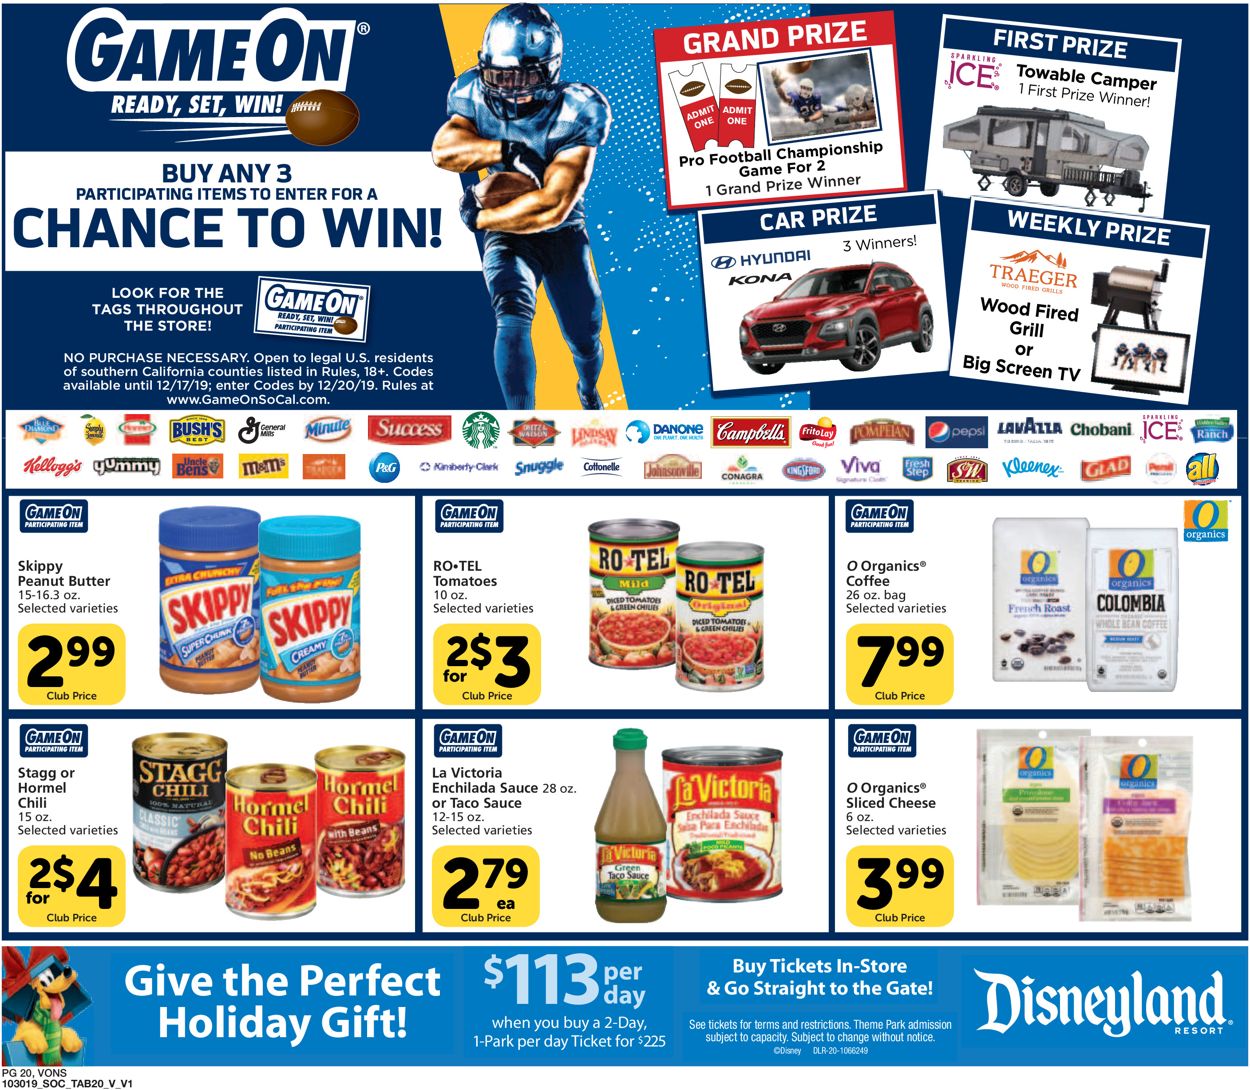 Vons Ad from 10/30/2019